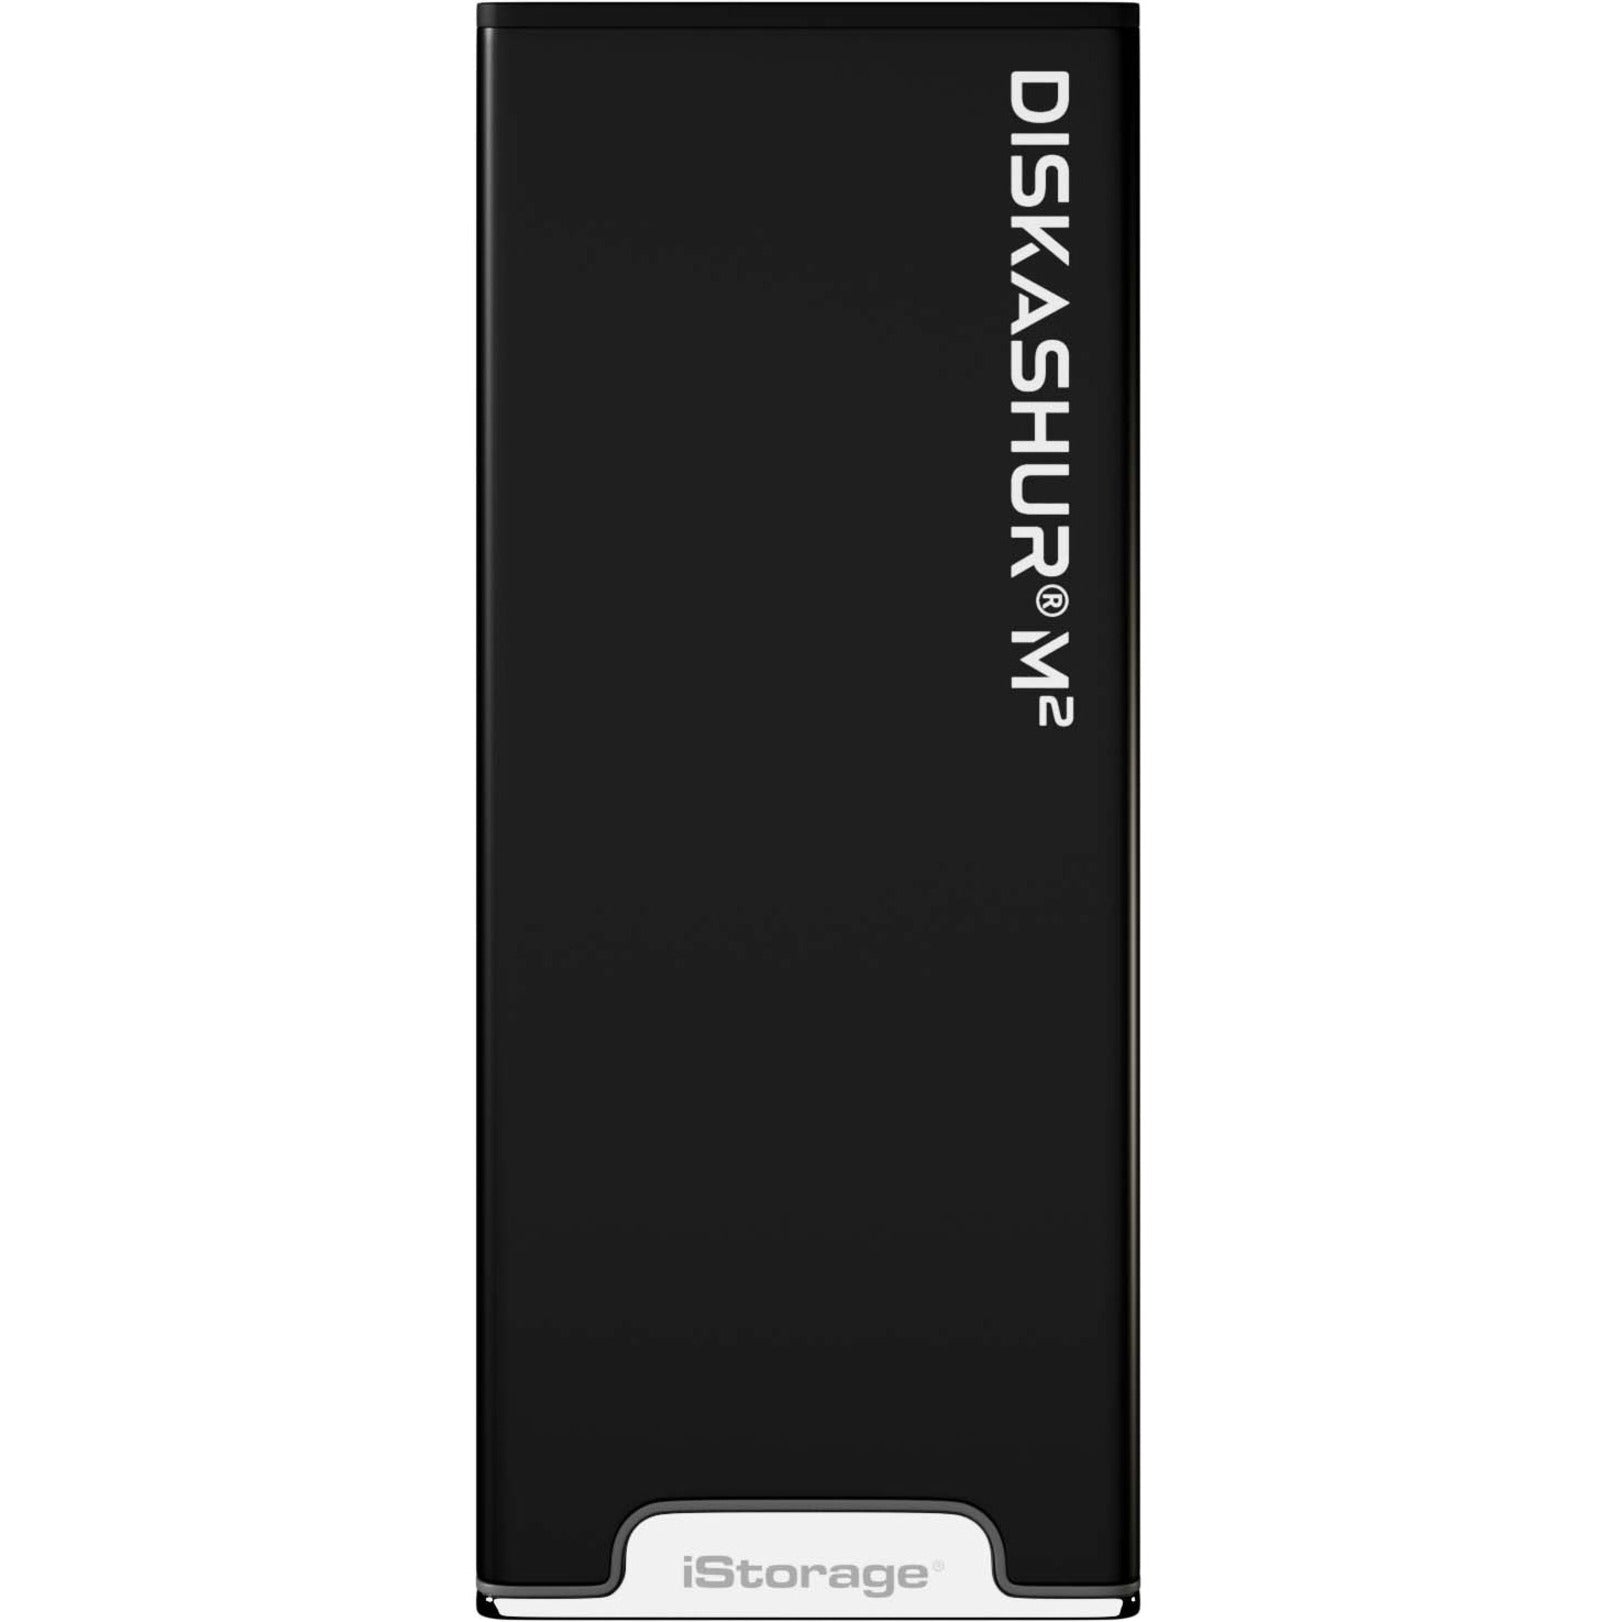 iStorage IS-DAM2-256-1000 diskAshur M2 Portable SSD, PIN Authenticated, Hardware Encrypted, 1TB, USB 3.2, Ultra-fast, FIPS Compliant, Rugged & Portable